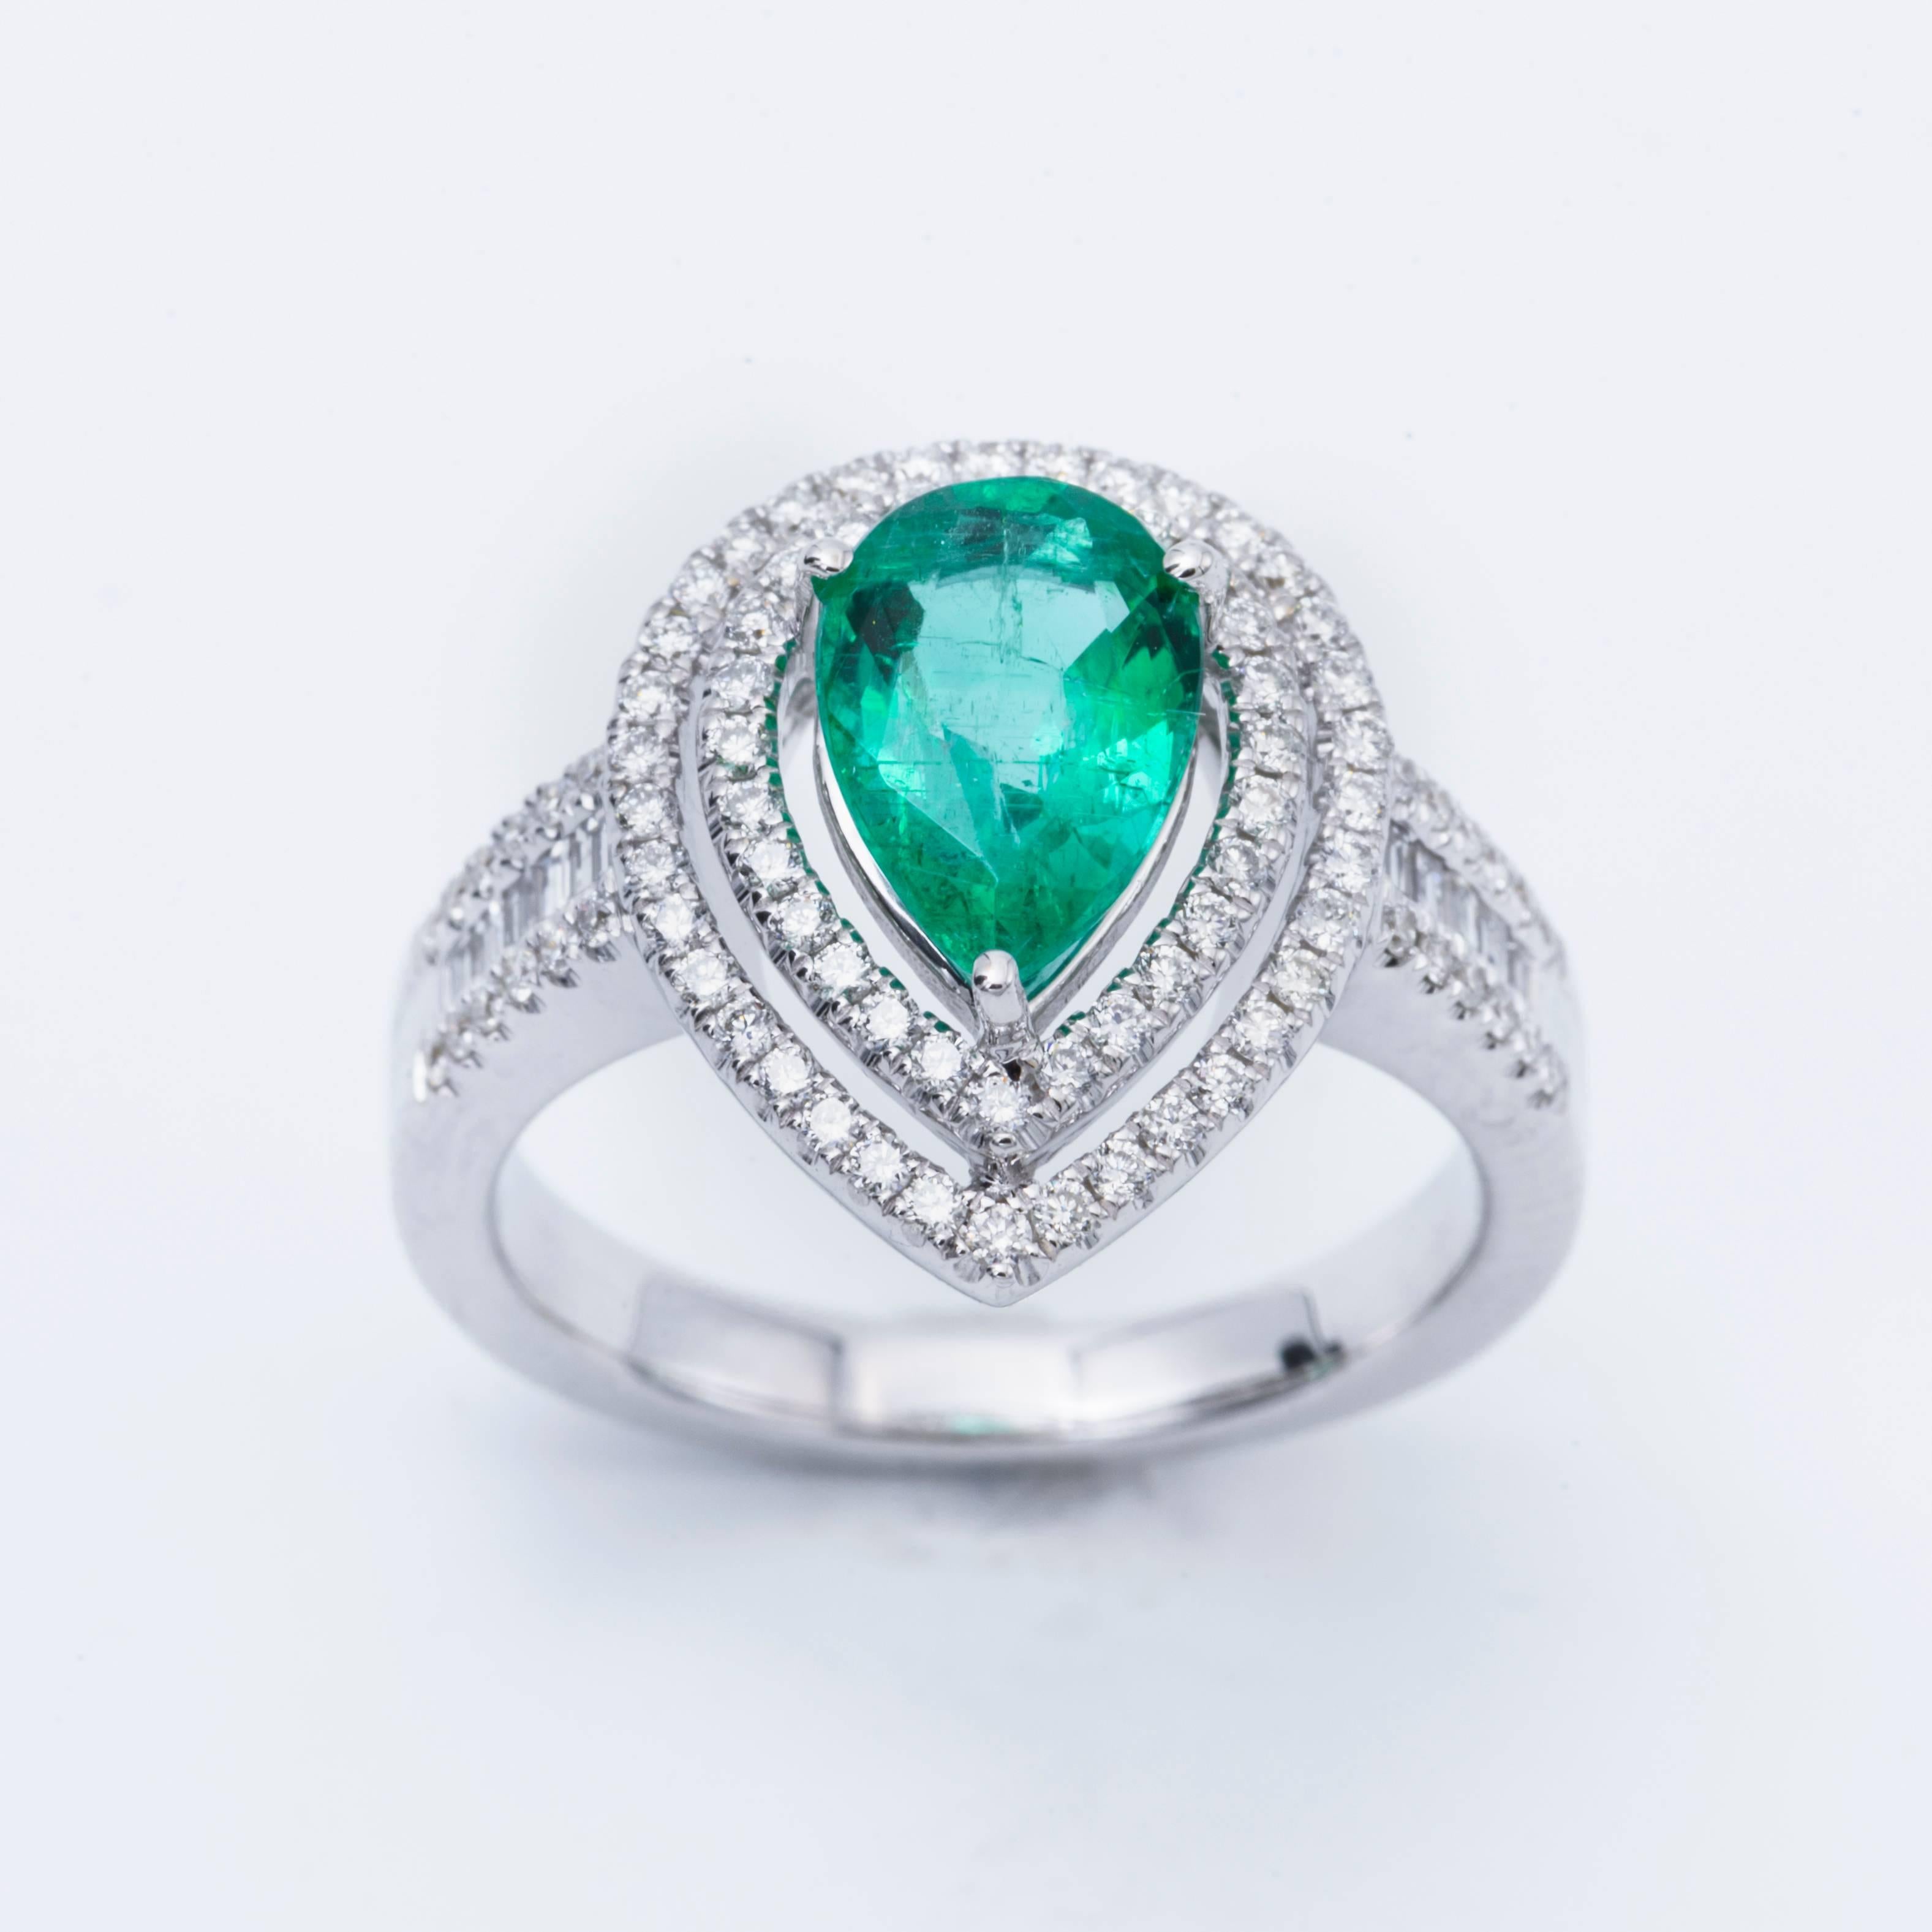 Style: 18k White Pear Shape Emerald  Diamond Halo Engagement Ring
Material: 18k White Gold
Gemstone Details: 1 Pear Shape Emerald approximately 1.52 ct. 9x7 mm
Diamond Details: Approximately 0.65ctw of diamonds. Diamonds are G/H in color and SI in